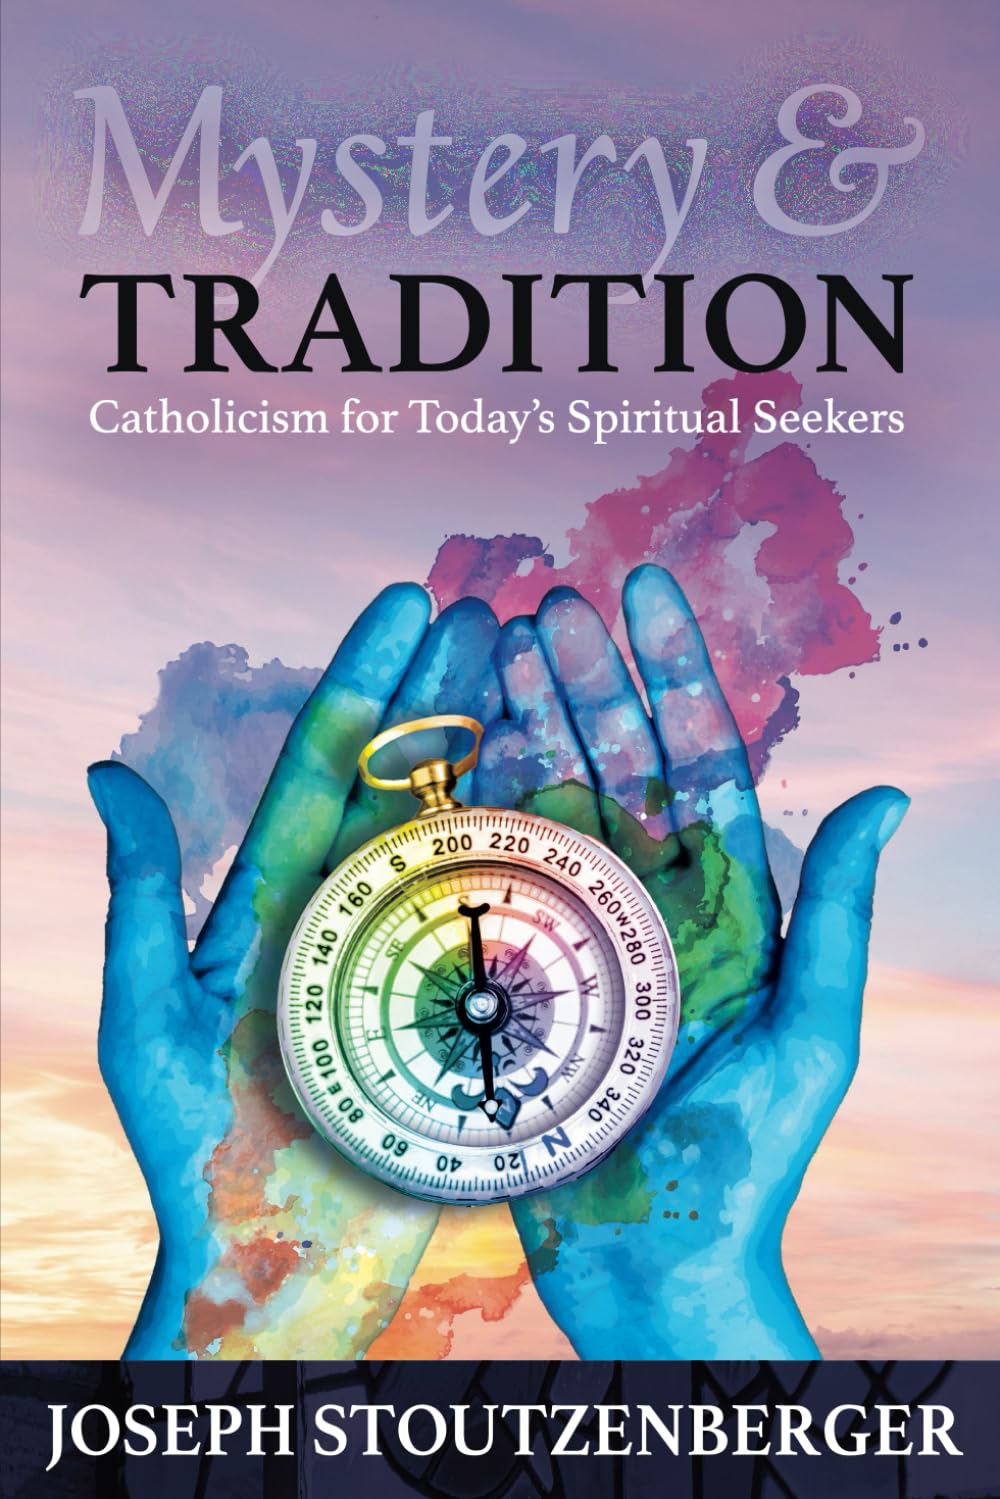 Mystery and Tradition: Catholicism for Today's Spiritual Seekers